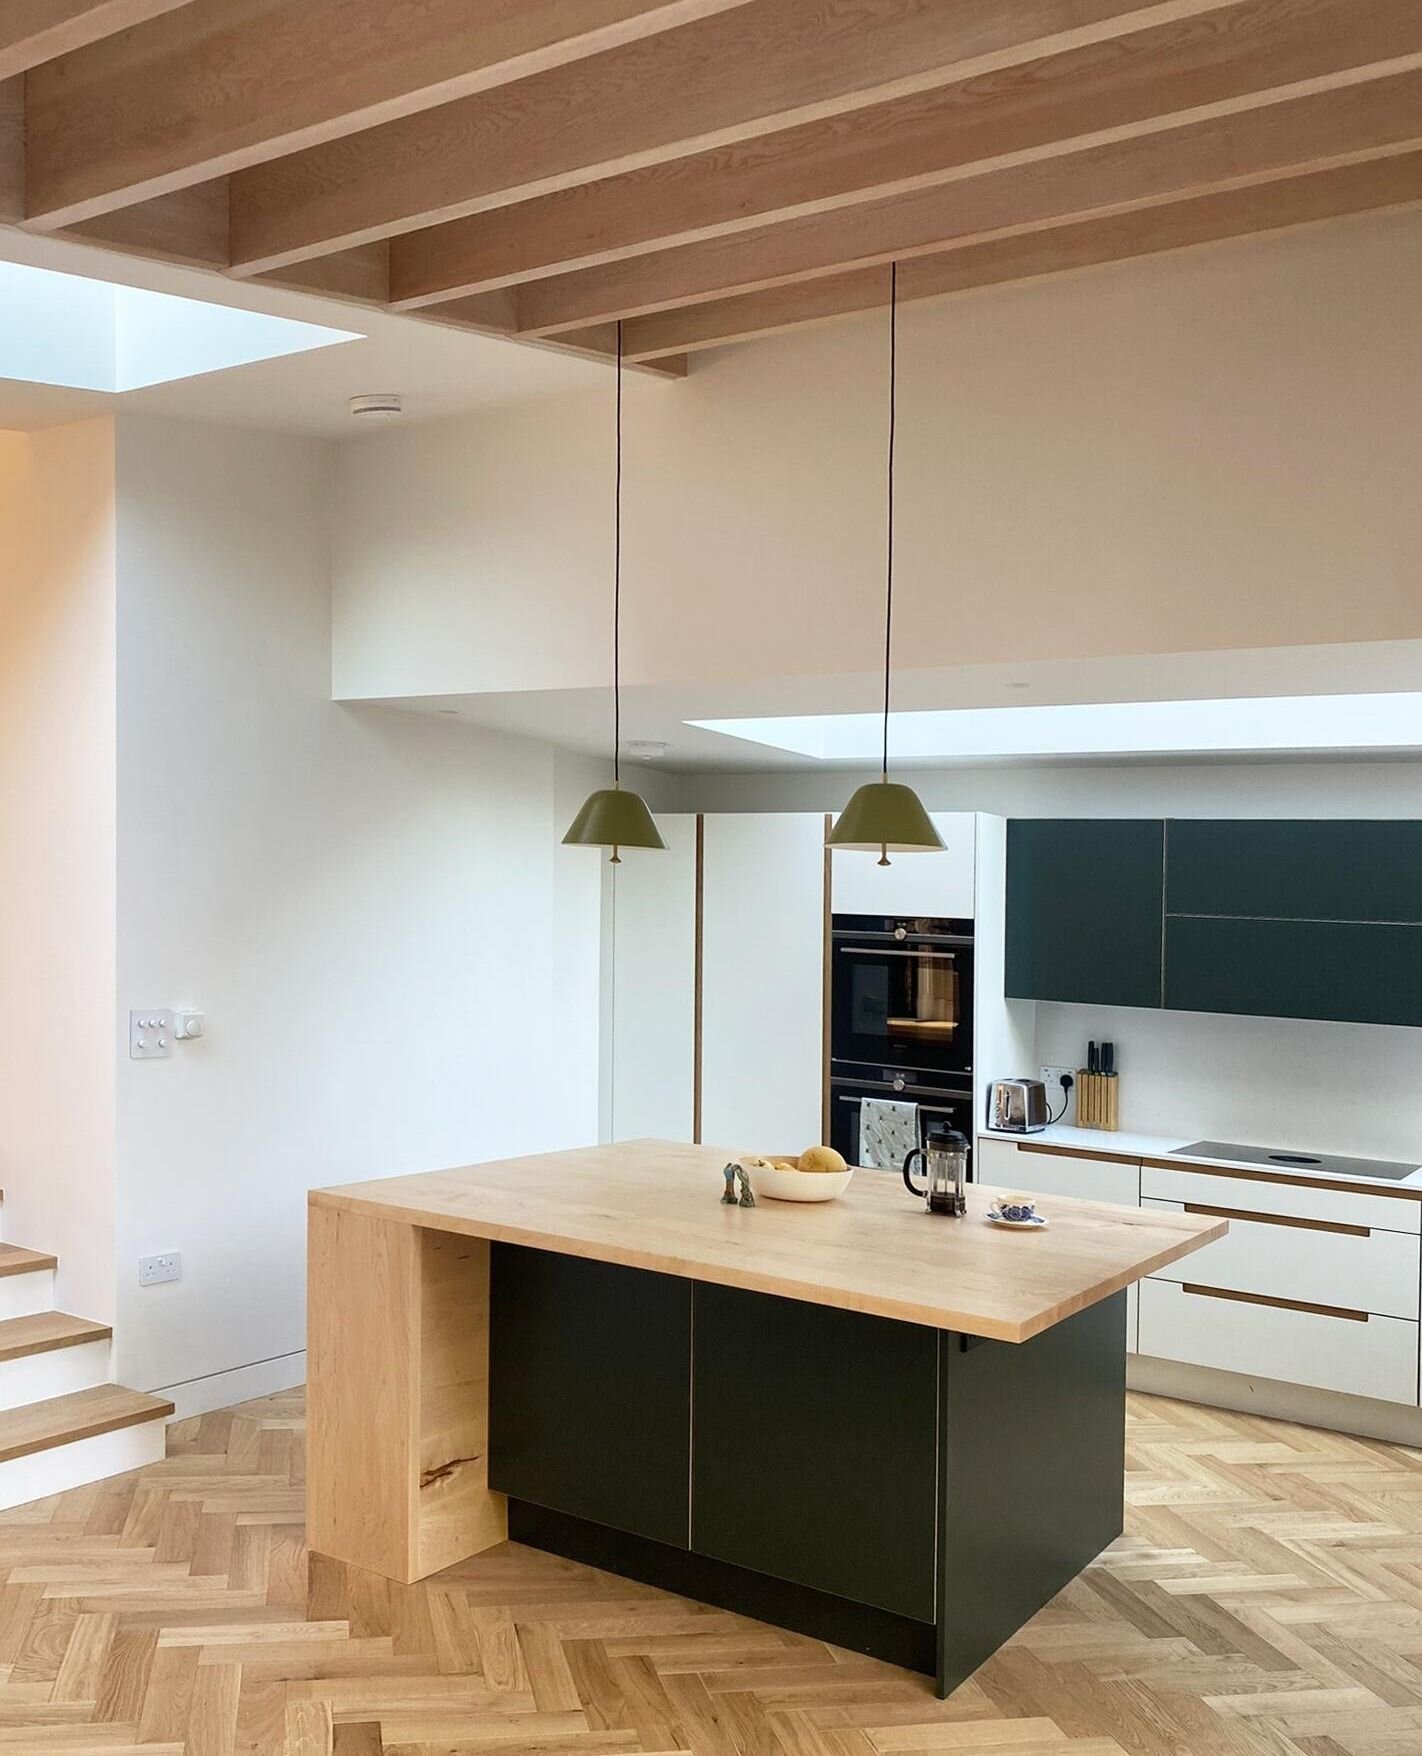 A feature up and over window in our recently completed residential project in Brockley, brings natural daylight into the heart of the kitchen space, with a full length strip roof light positioned in the sloping green roof which defines the social spa